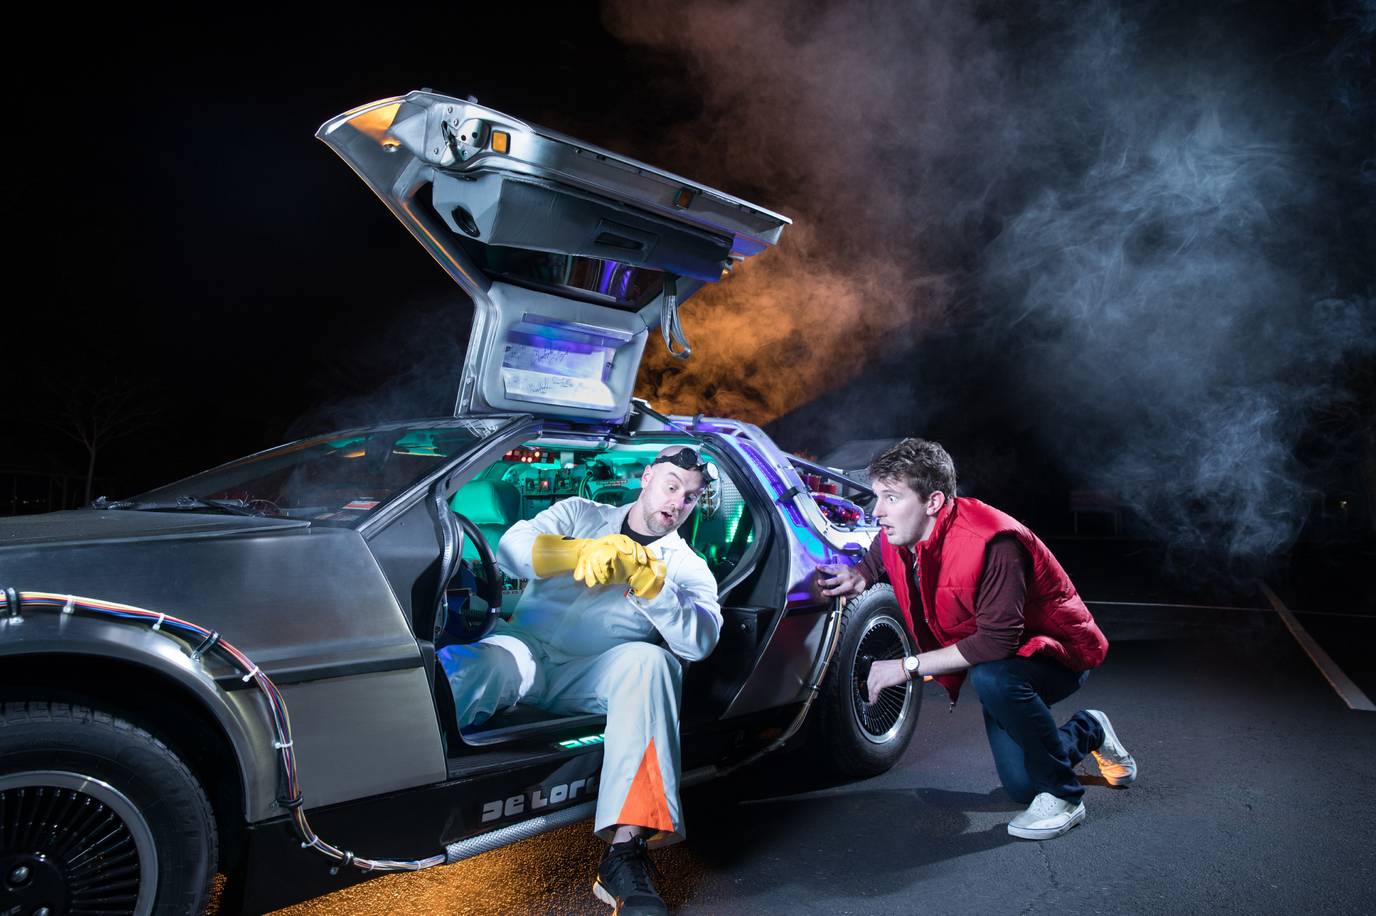 Dr Fuse and a student recreate a scene from Back to the Future.